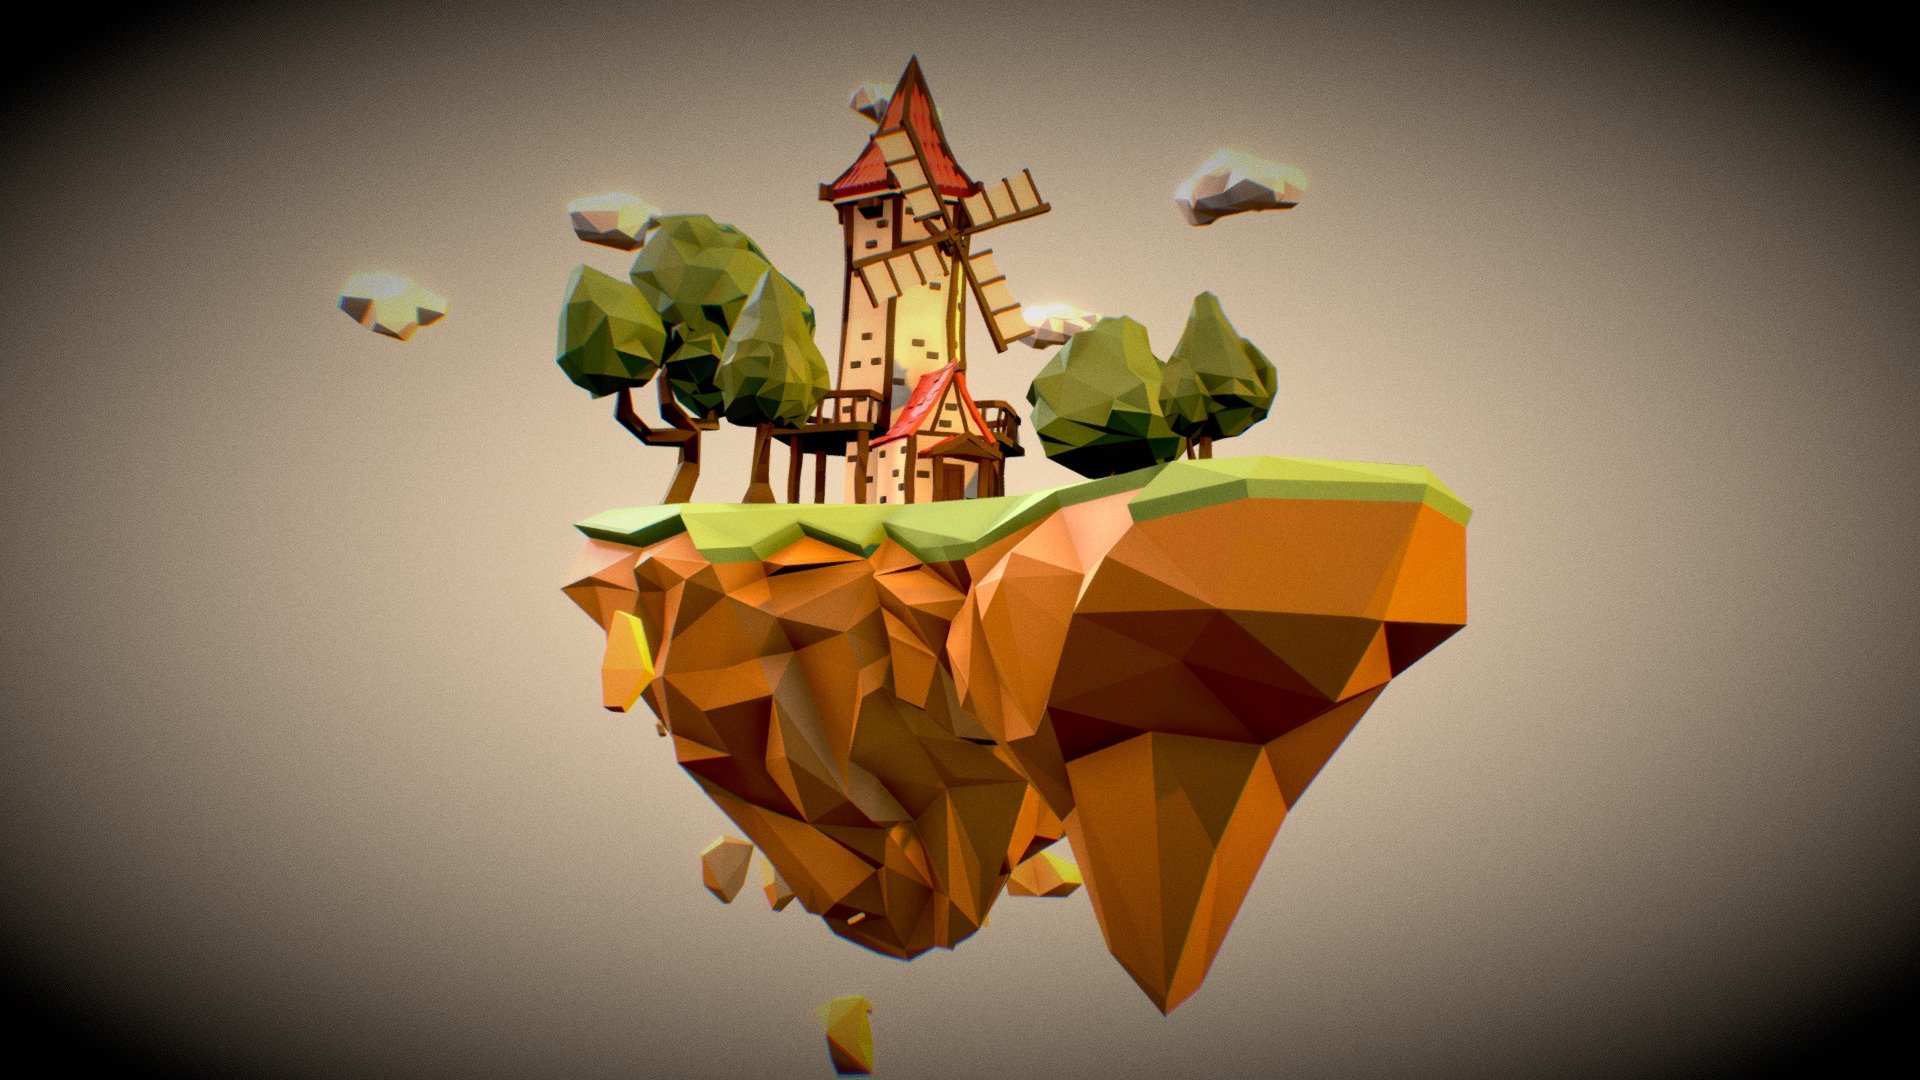 Low poly scene of an animated Windmill on a floating island with some trees and clouds around it - Floating Windmill - 3D model by P3D (@p3d_avilla) 3d model